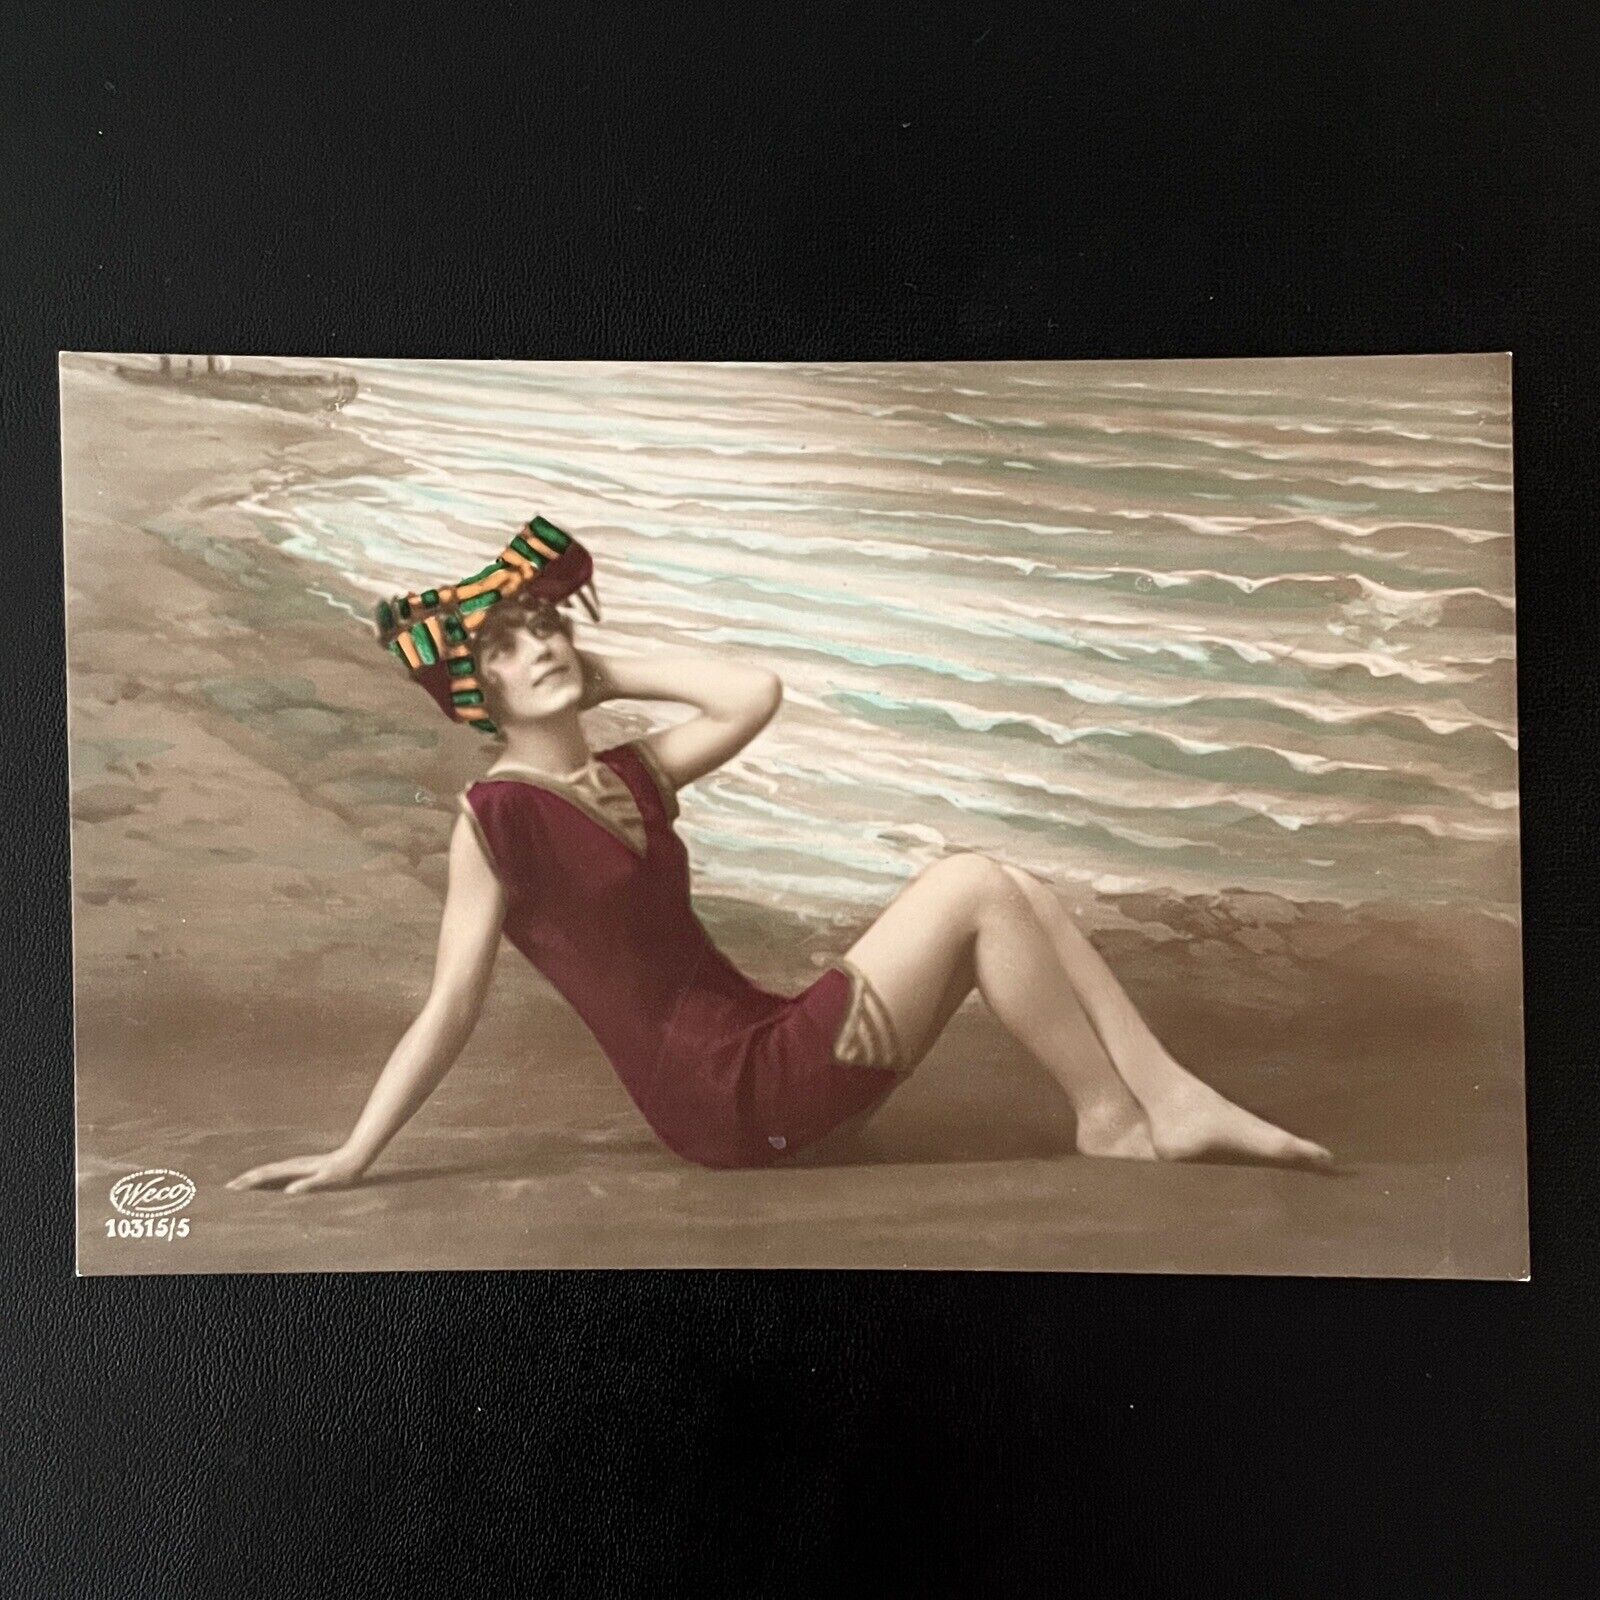 1920s French Glamour Fashion SWIMSUIT FLAPPER Bathing Beauty RPPC 10315/5